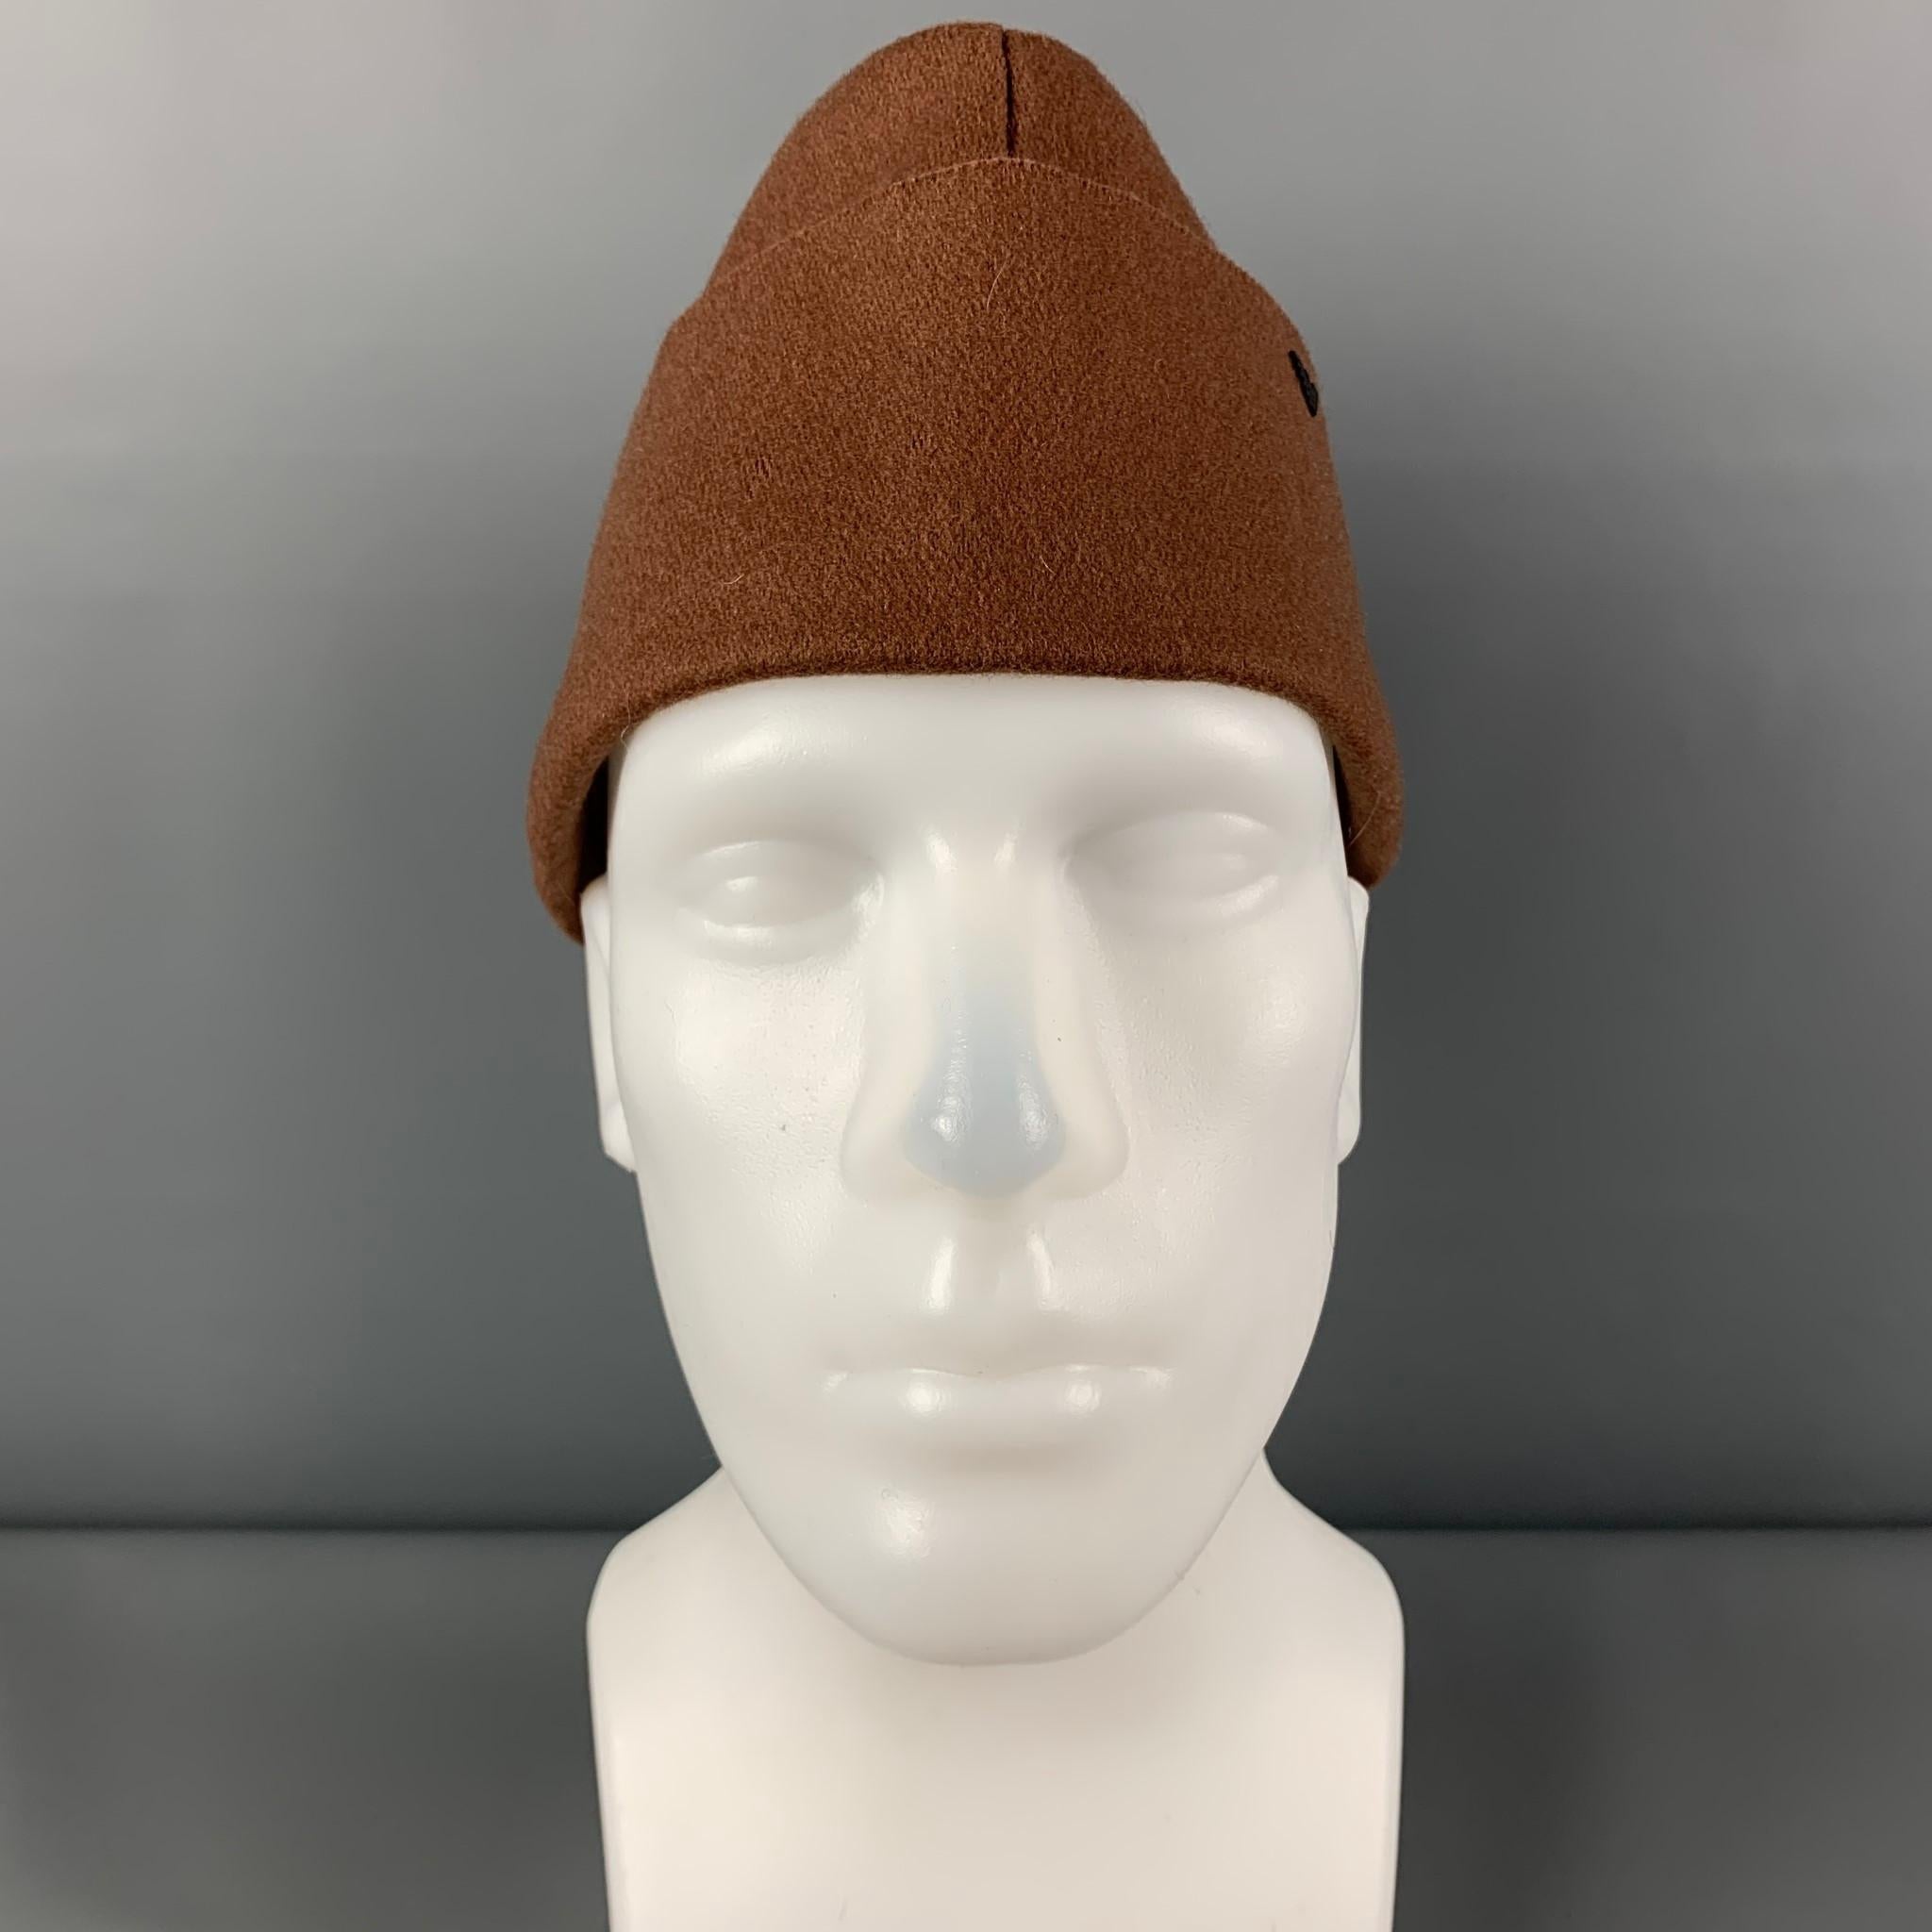 EMPORIO ARMANI hat comes in a brown wool blend featuring a military style and a ribbon trim. Made in Italy.

Very Good Pre-Owned Condition.
Marked: 58

Measurements:

Opening: 22 in.
Brim: 3 in
Height: 5.5 in.